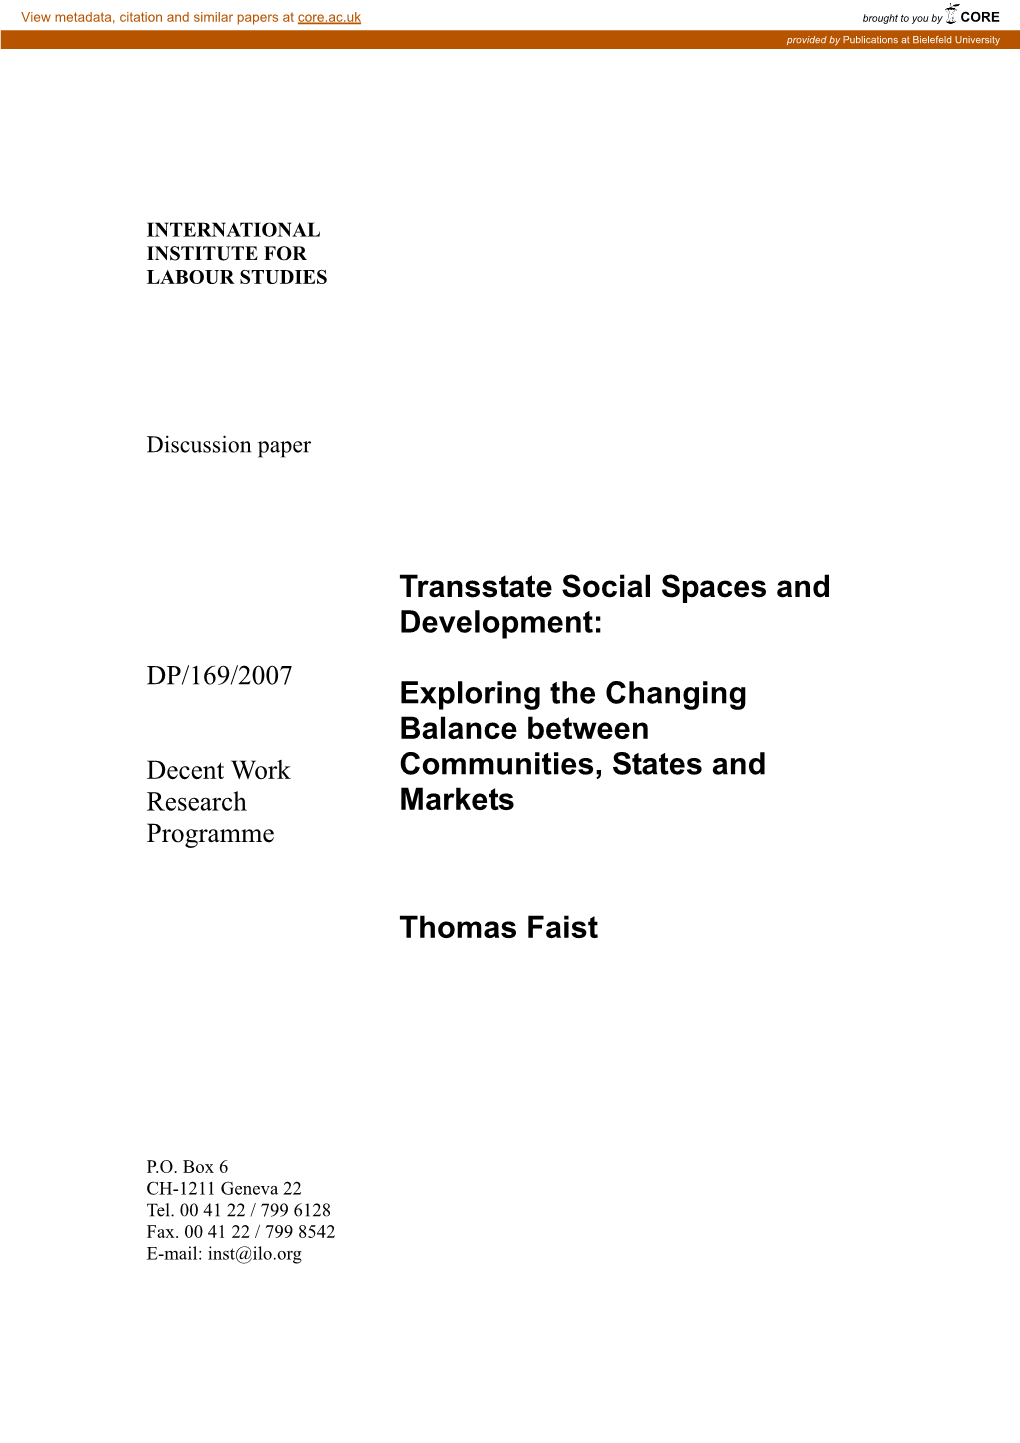 Exploring the Changing Balance Between Communities, States and Markets Thomas Faist